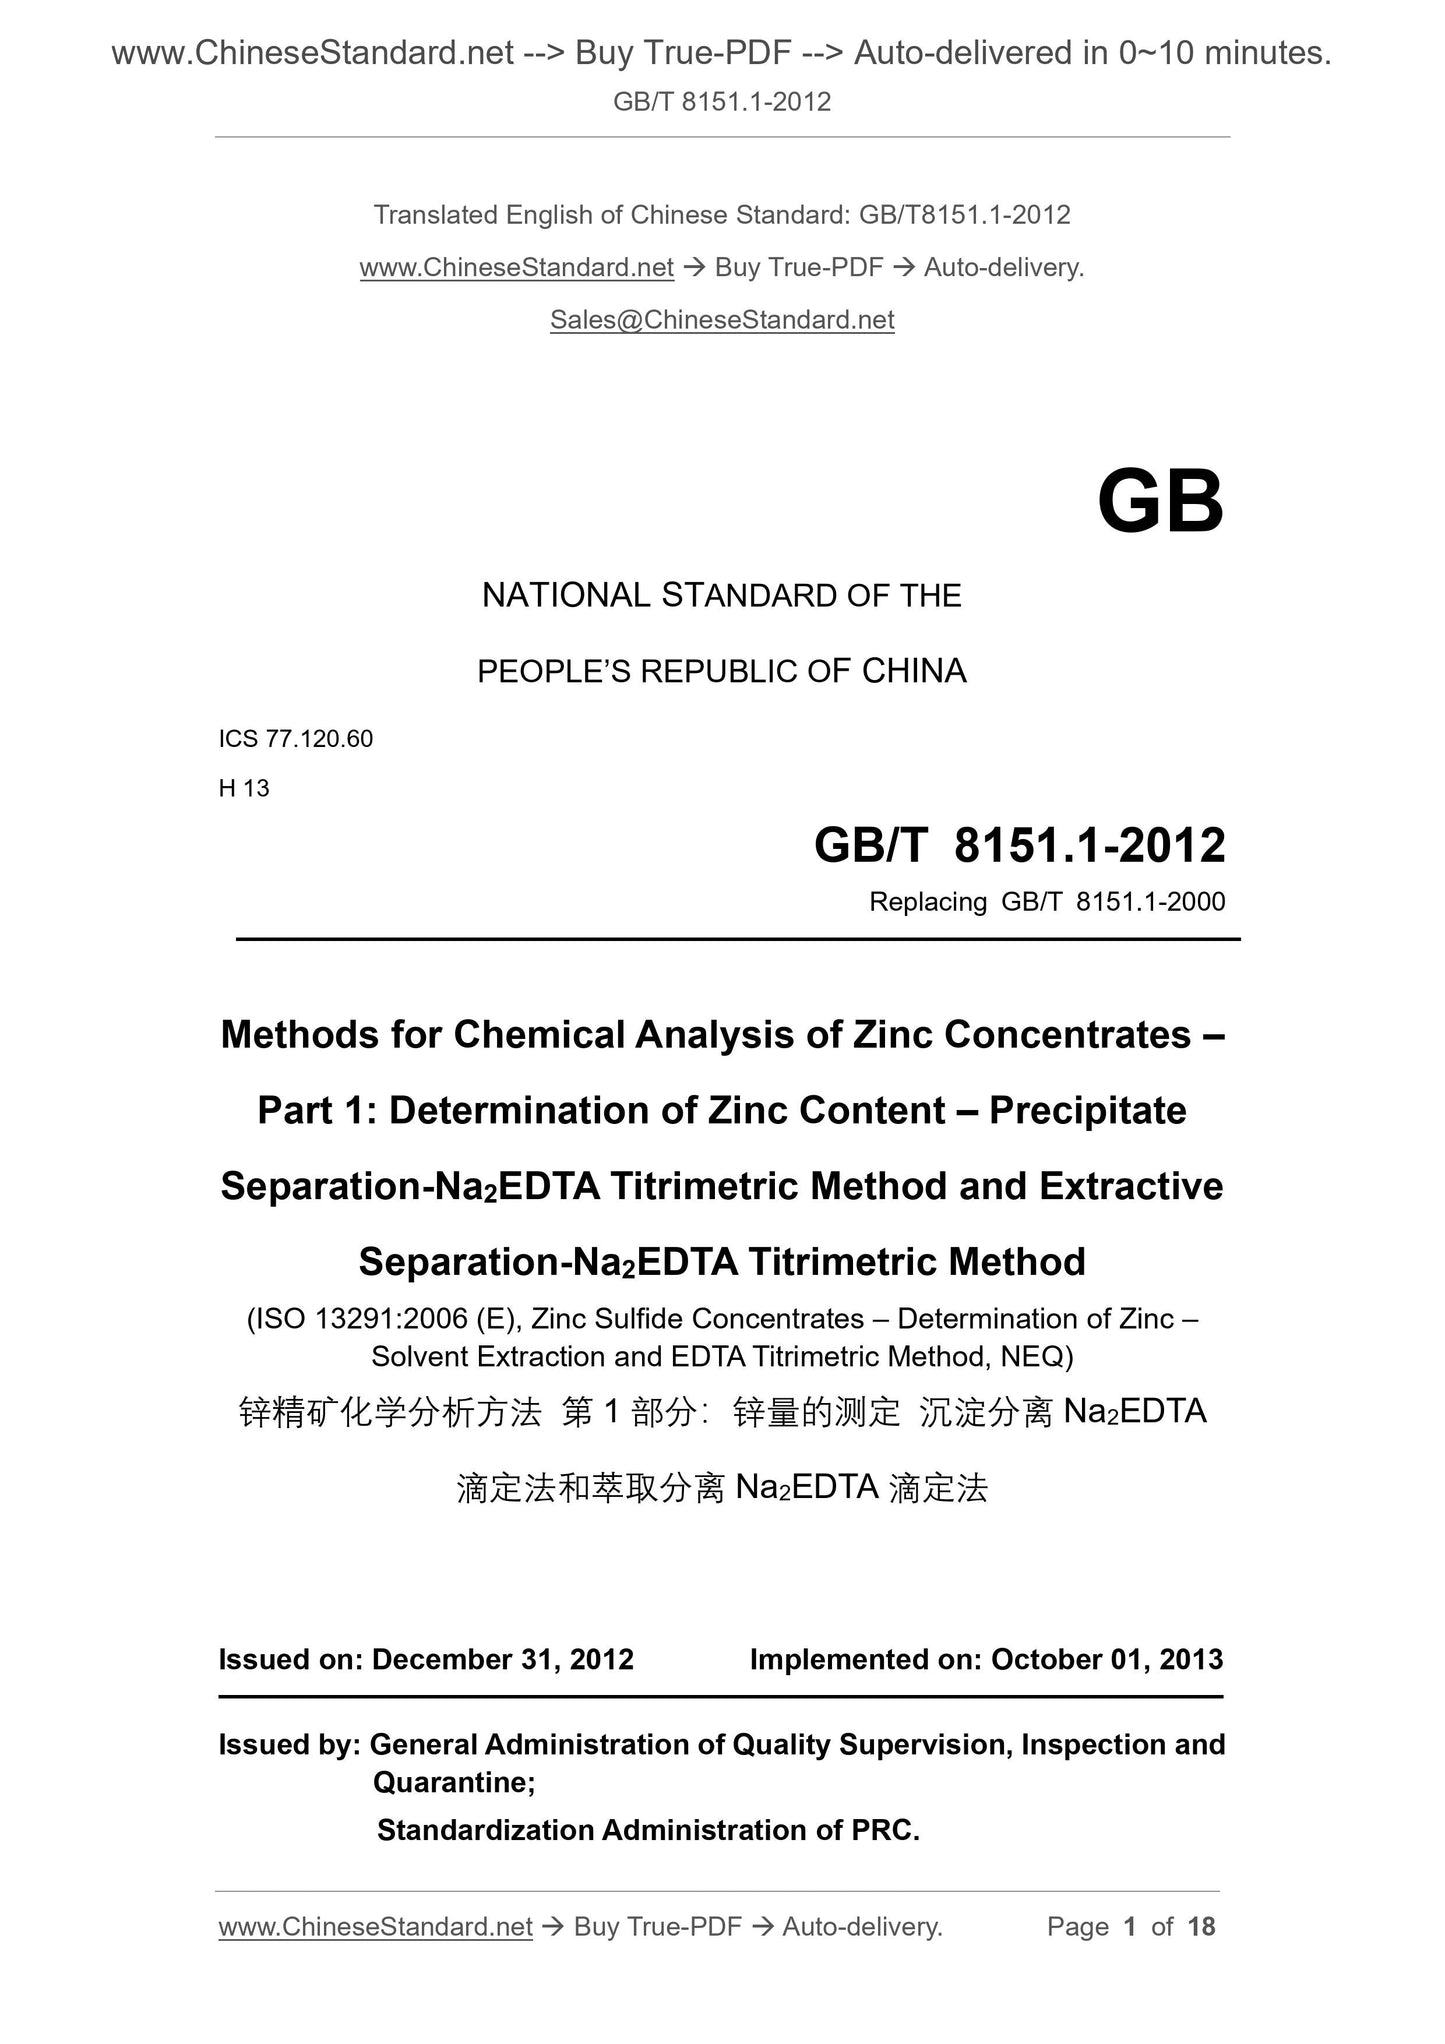 GB/T 8151.1-2012 Page 1